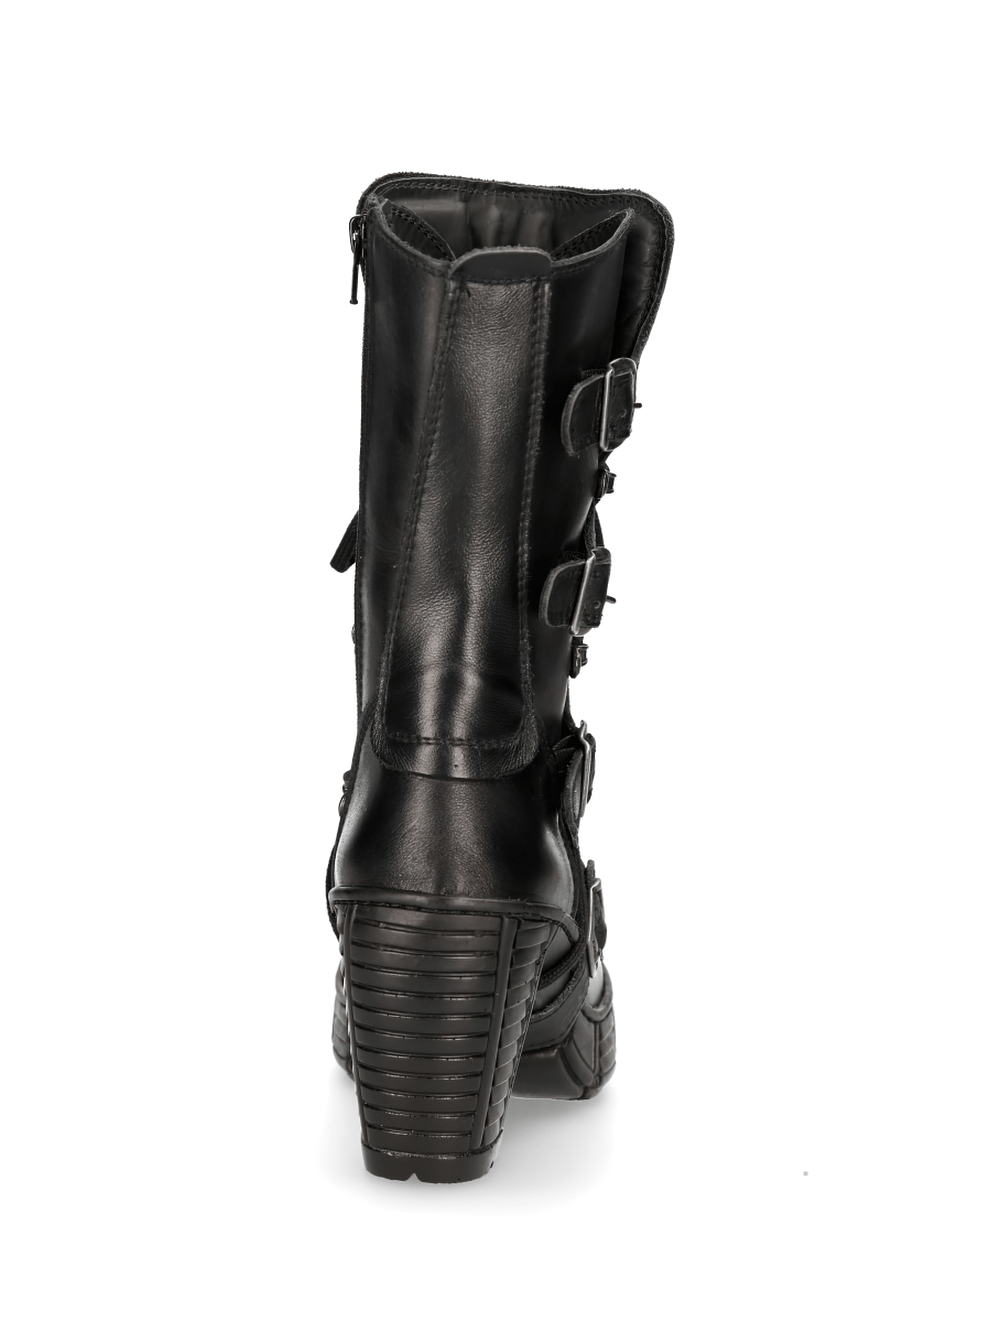 NEW ROCK Edgy Black Buckle-Detail Ankle Boots With Lace-Up